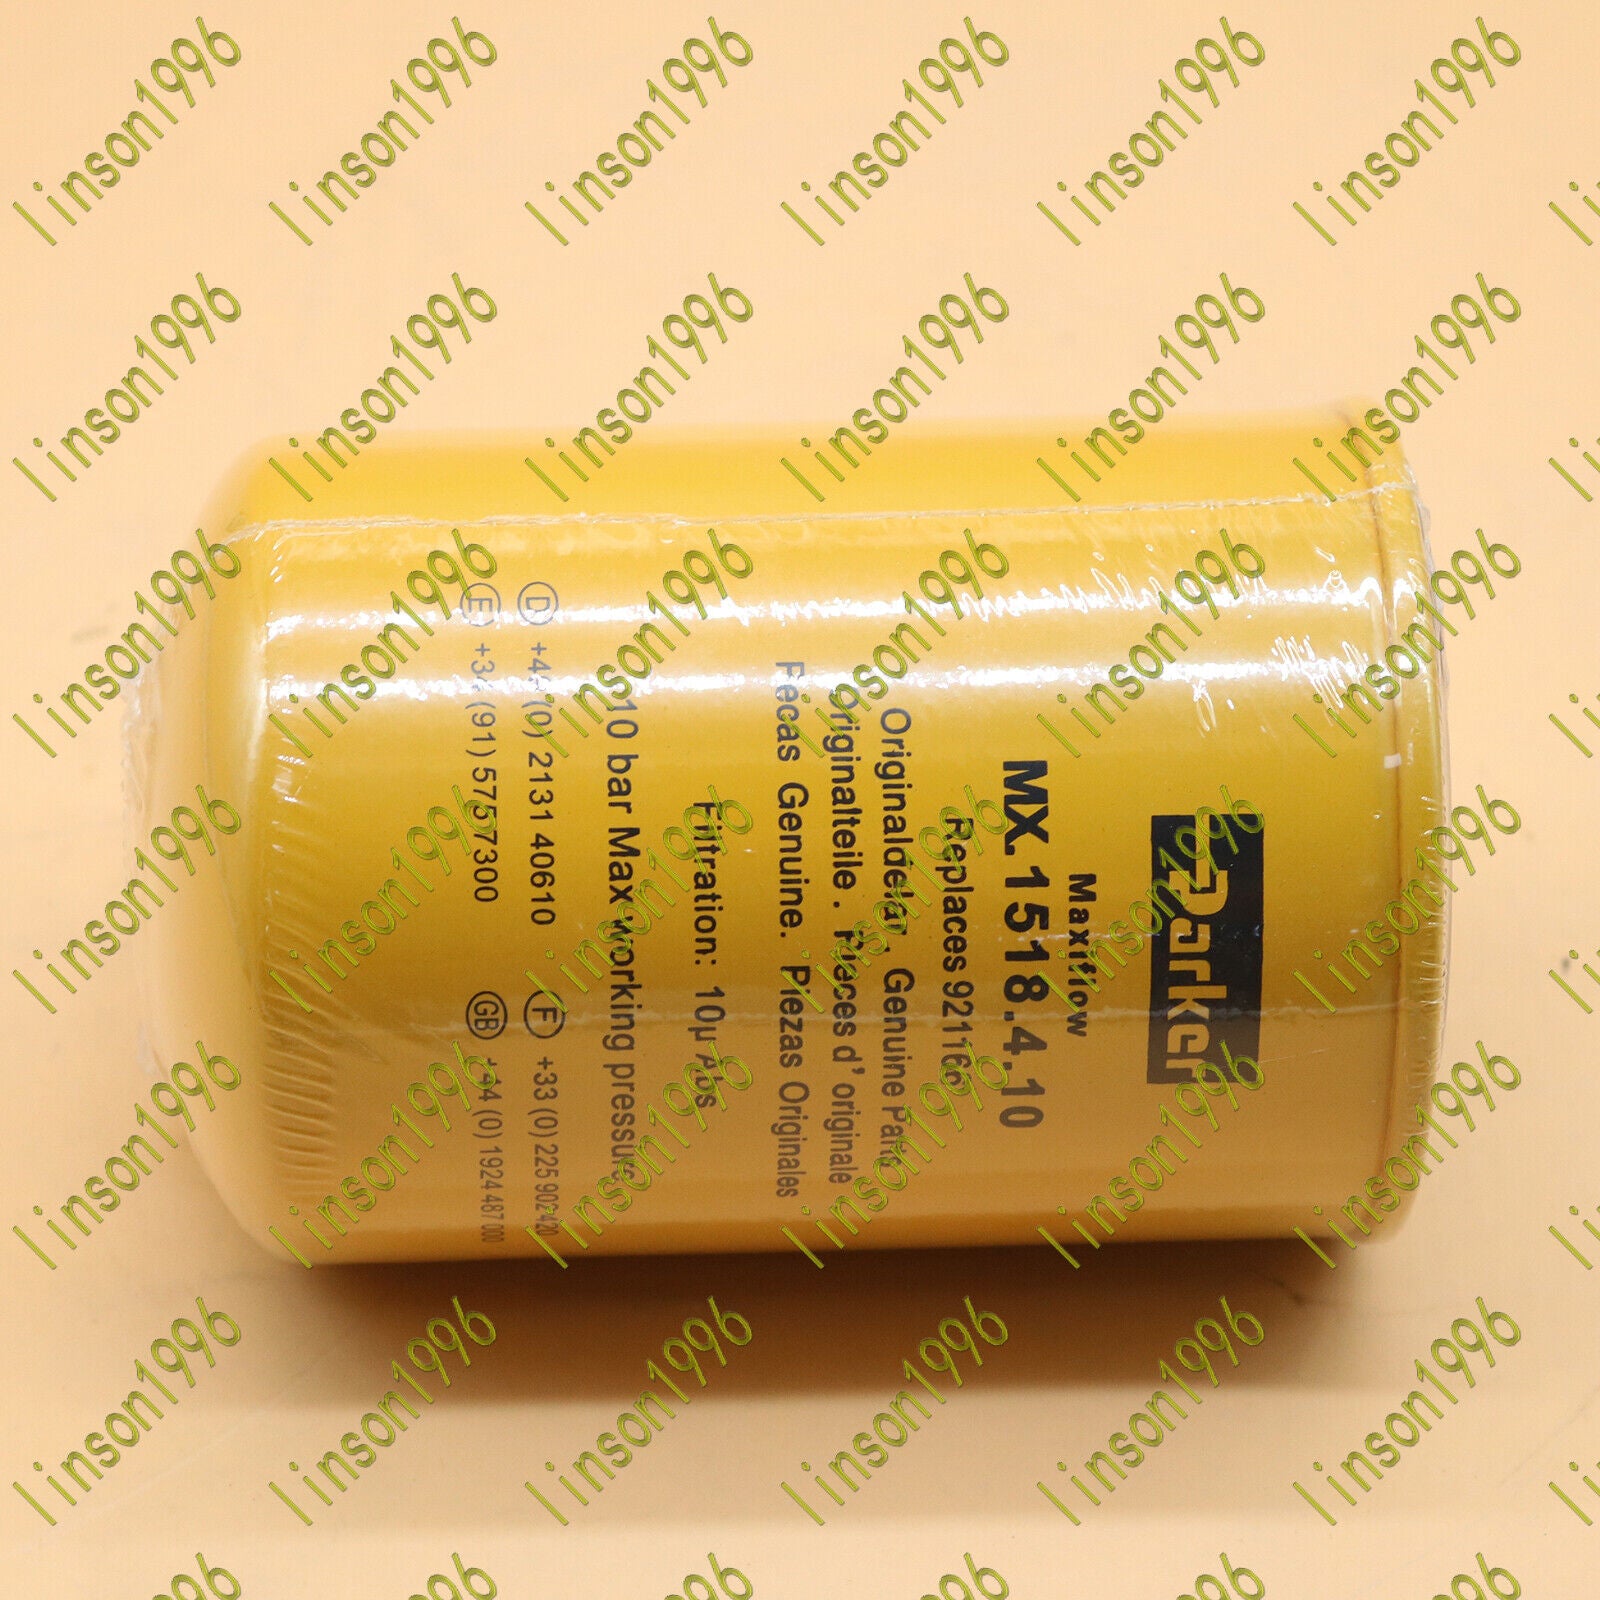 new One  Parker MX1518.4.10 Hydraulic Oil Filter In Box ship